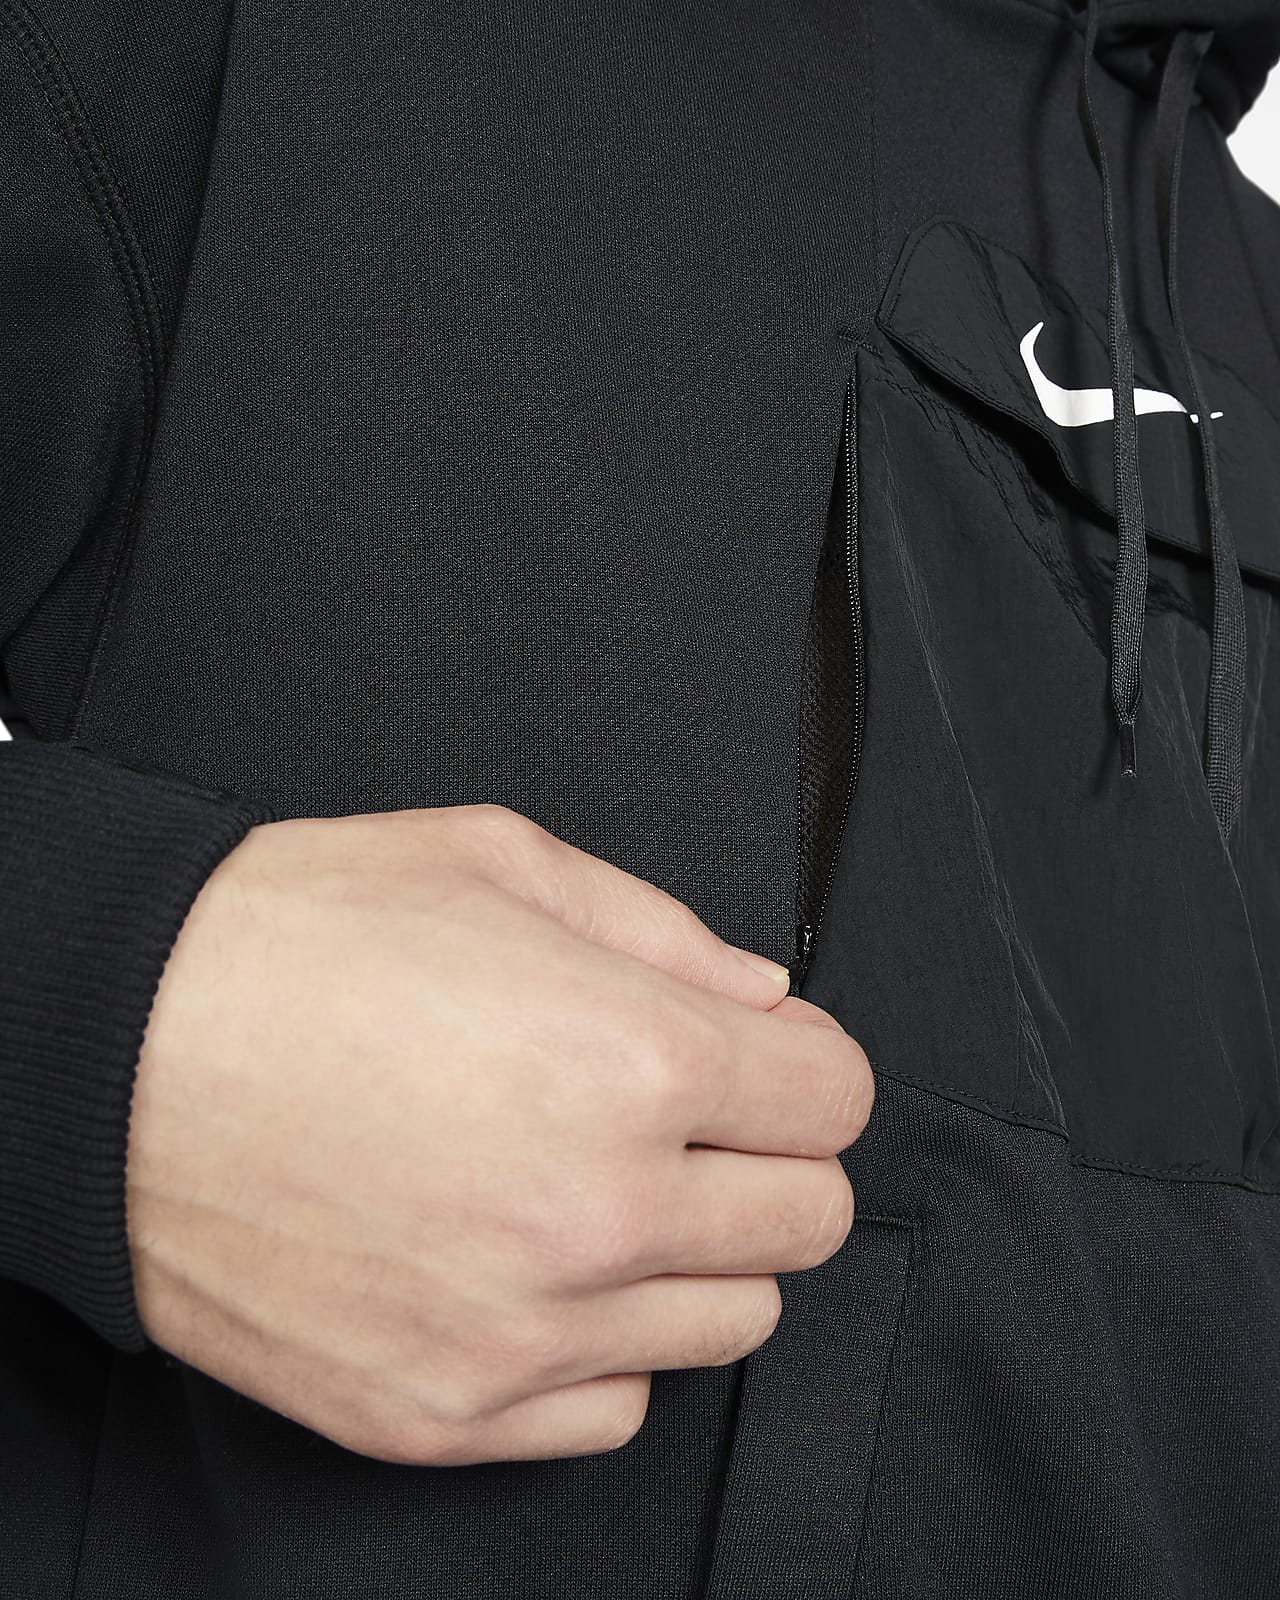 nike hoodie without pocket